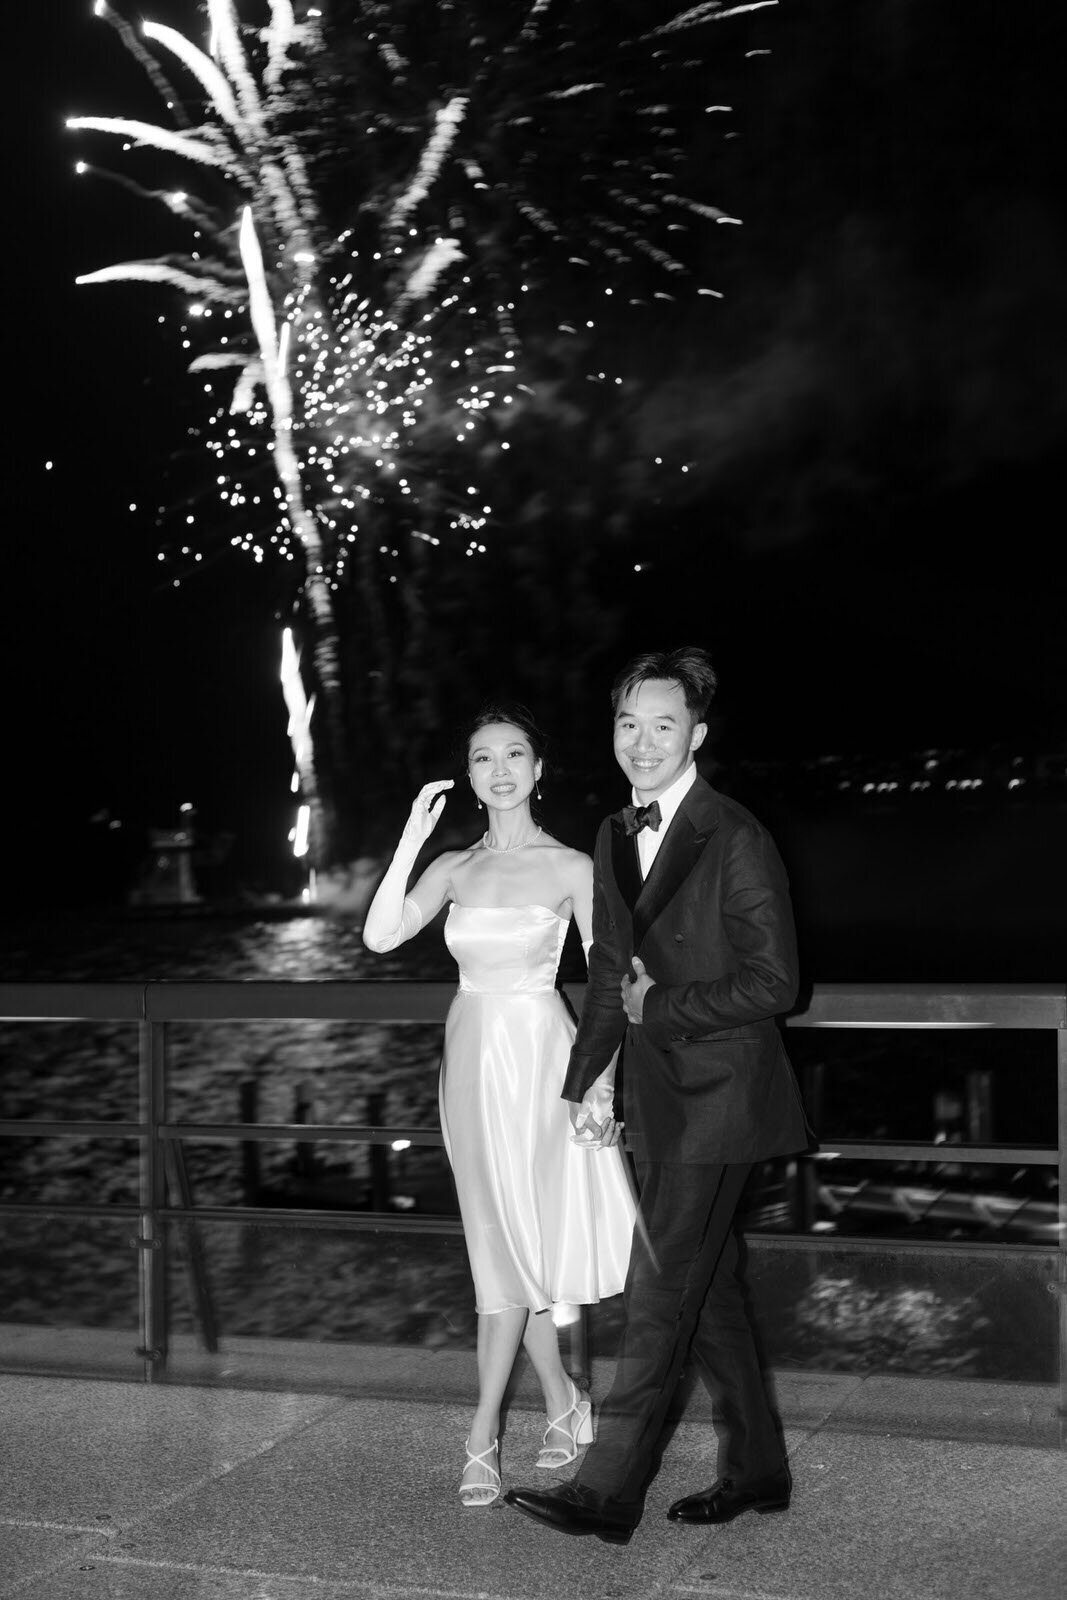 engaged couple during a firework display